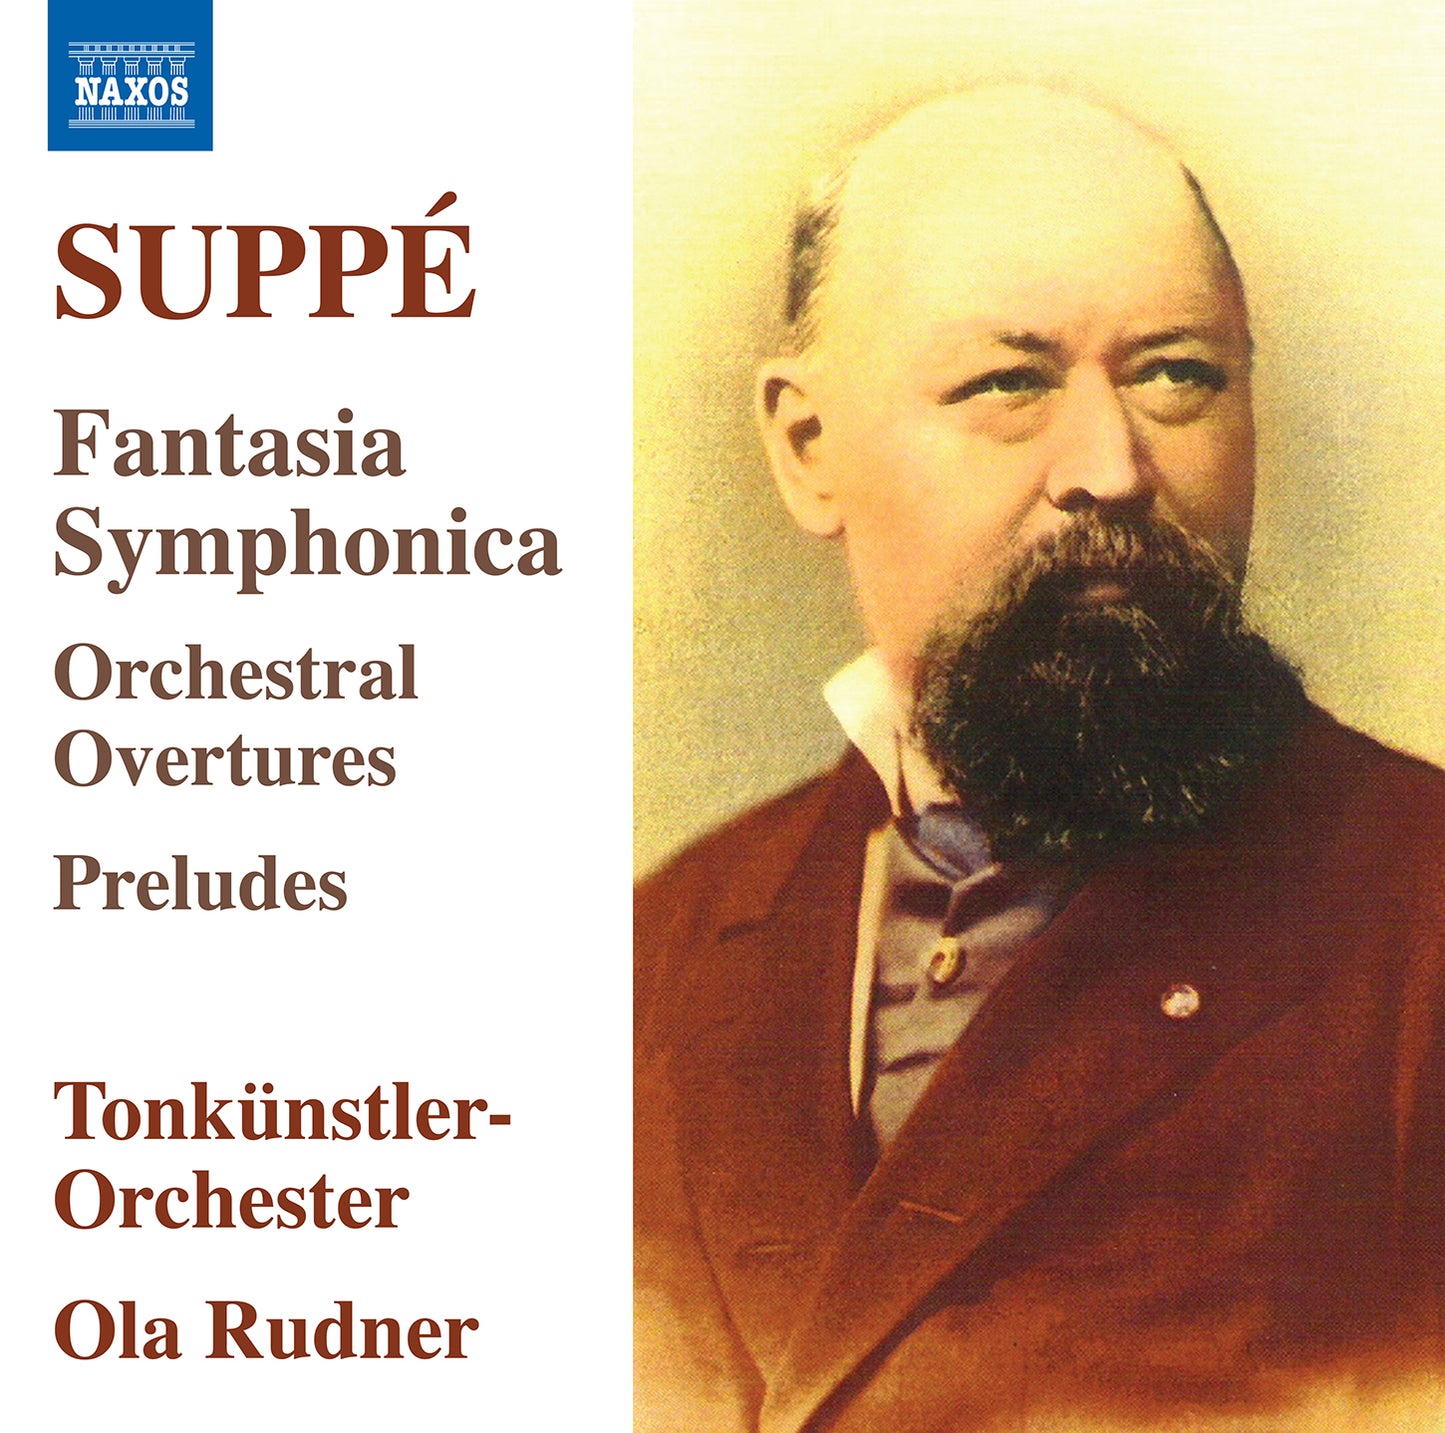 Suppe: Fantasia Symphonica; Orchestral Overtures; Preludes